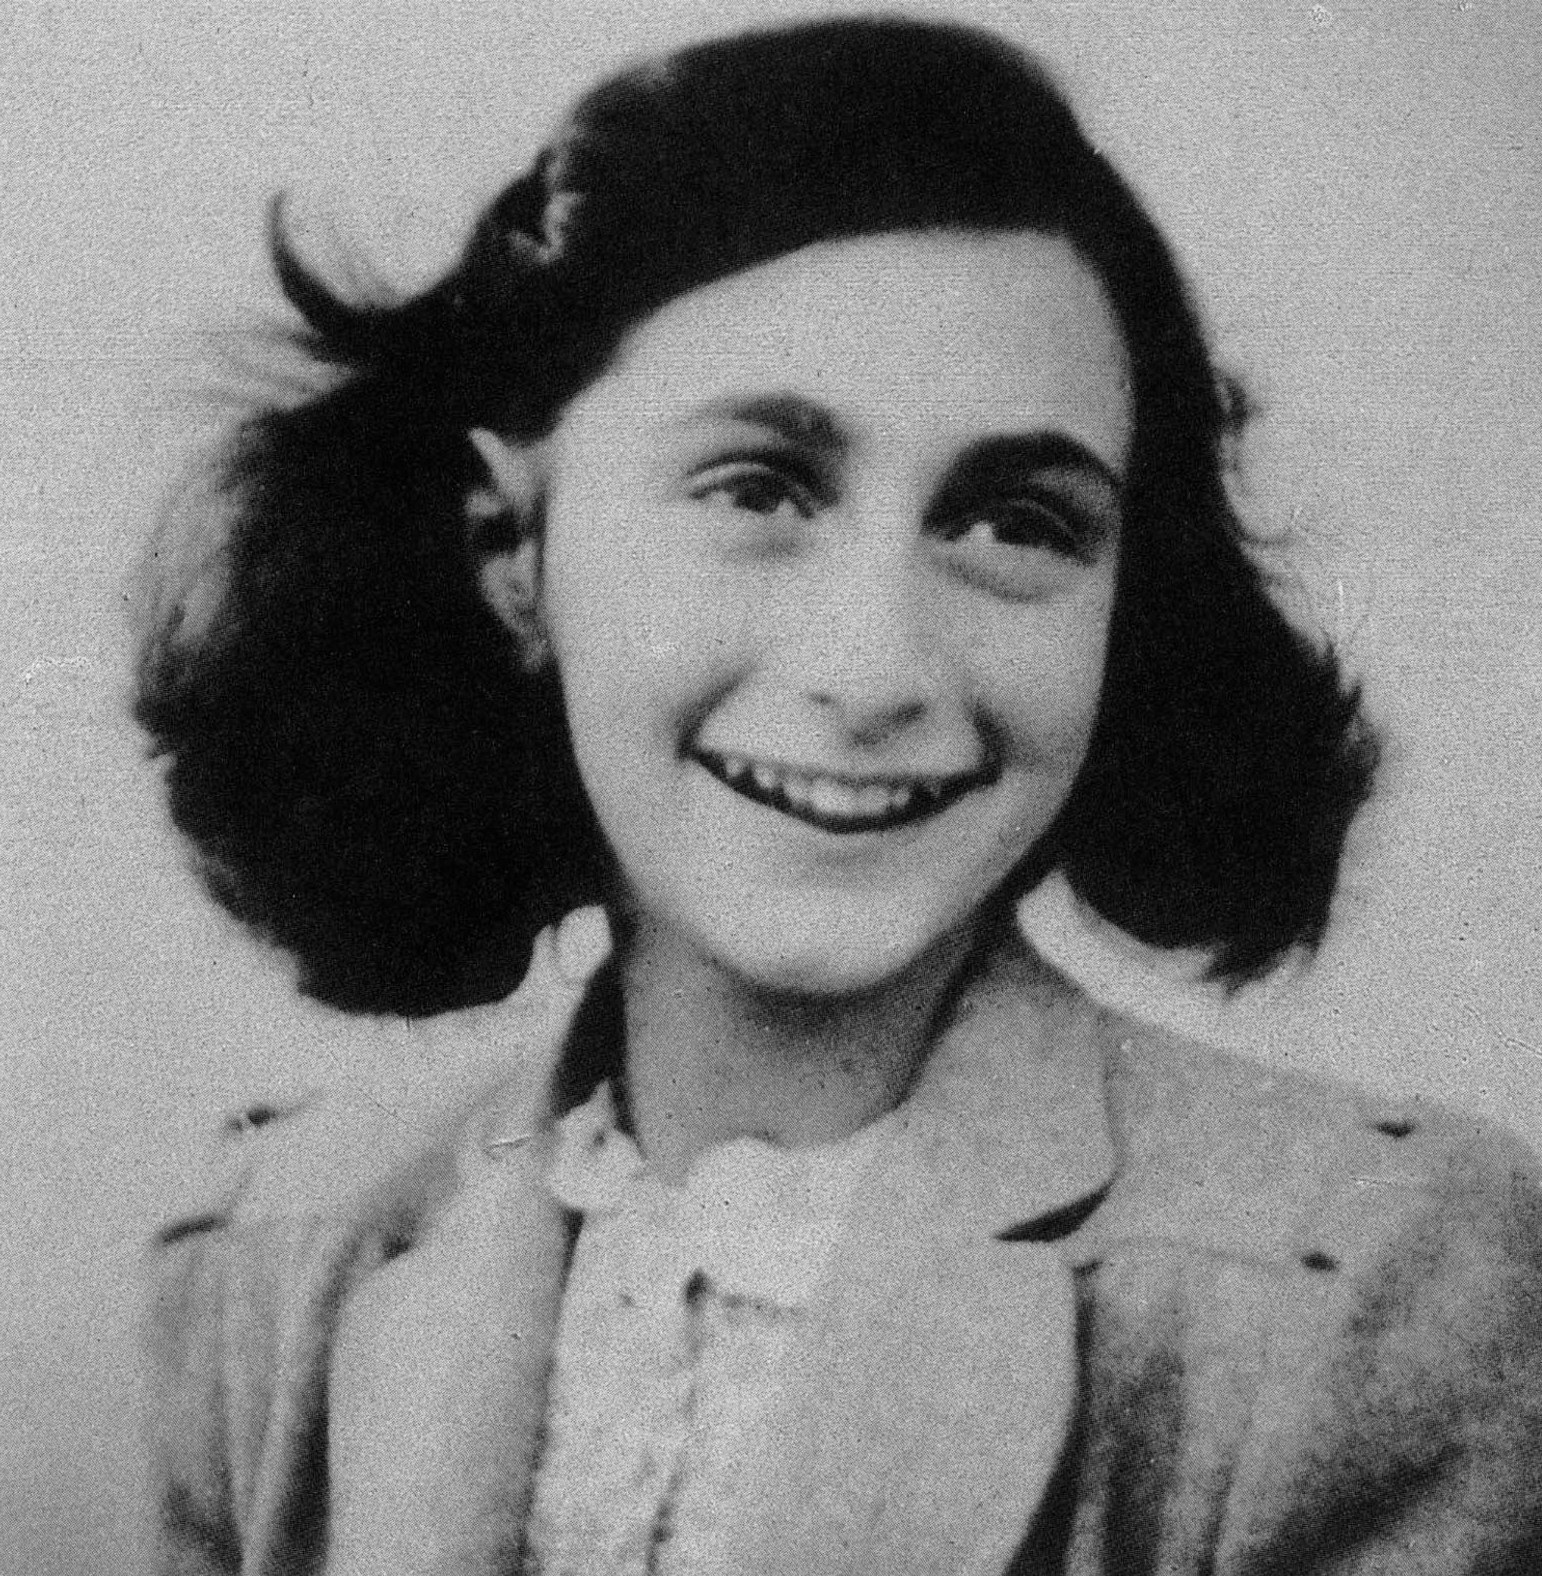 What We Can Learn from Anne Frank, Her Life and Surprising Legacy